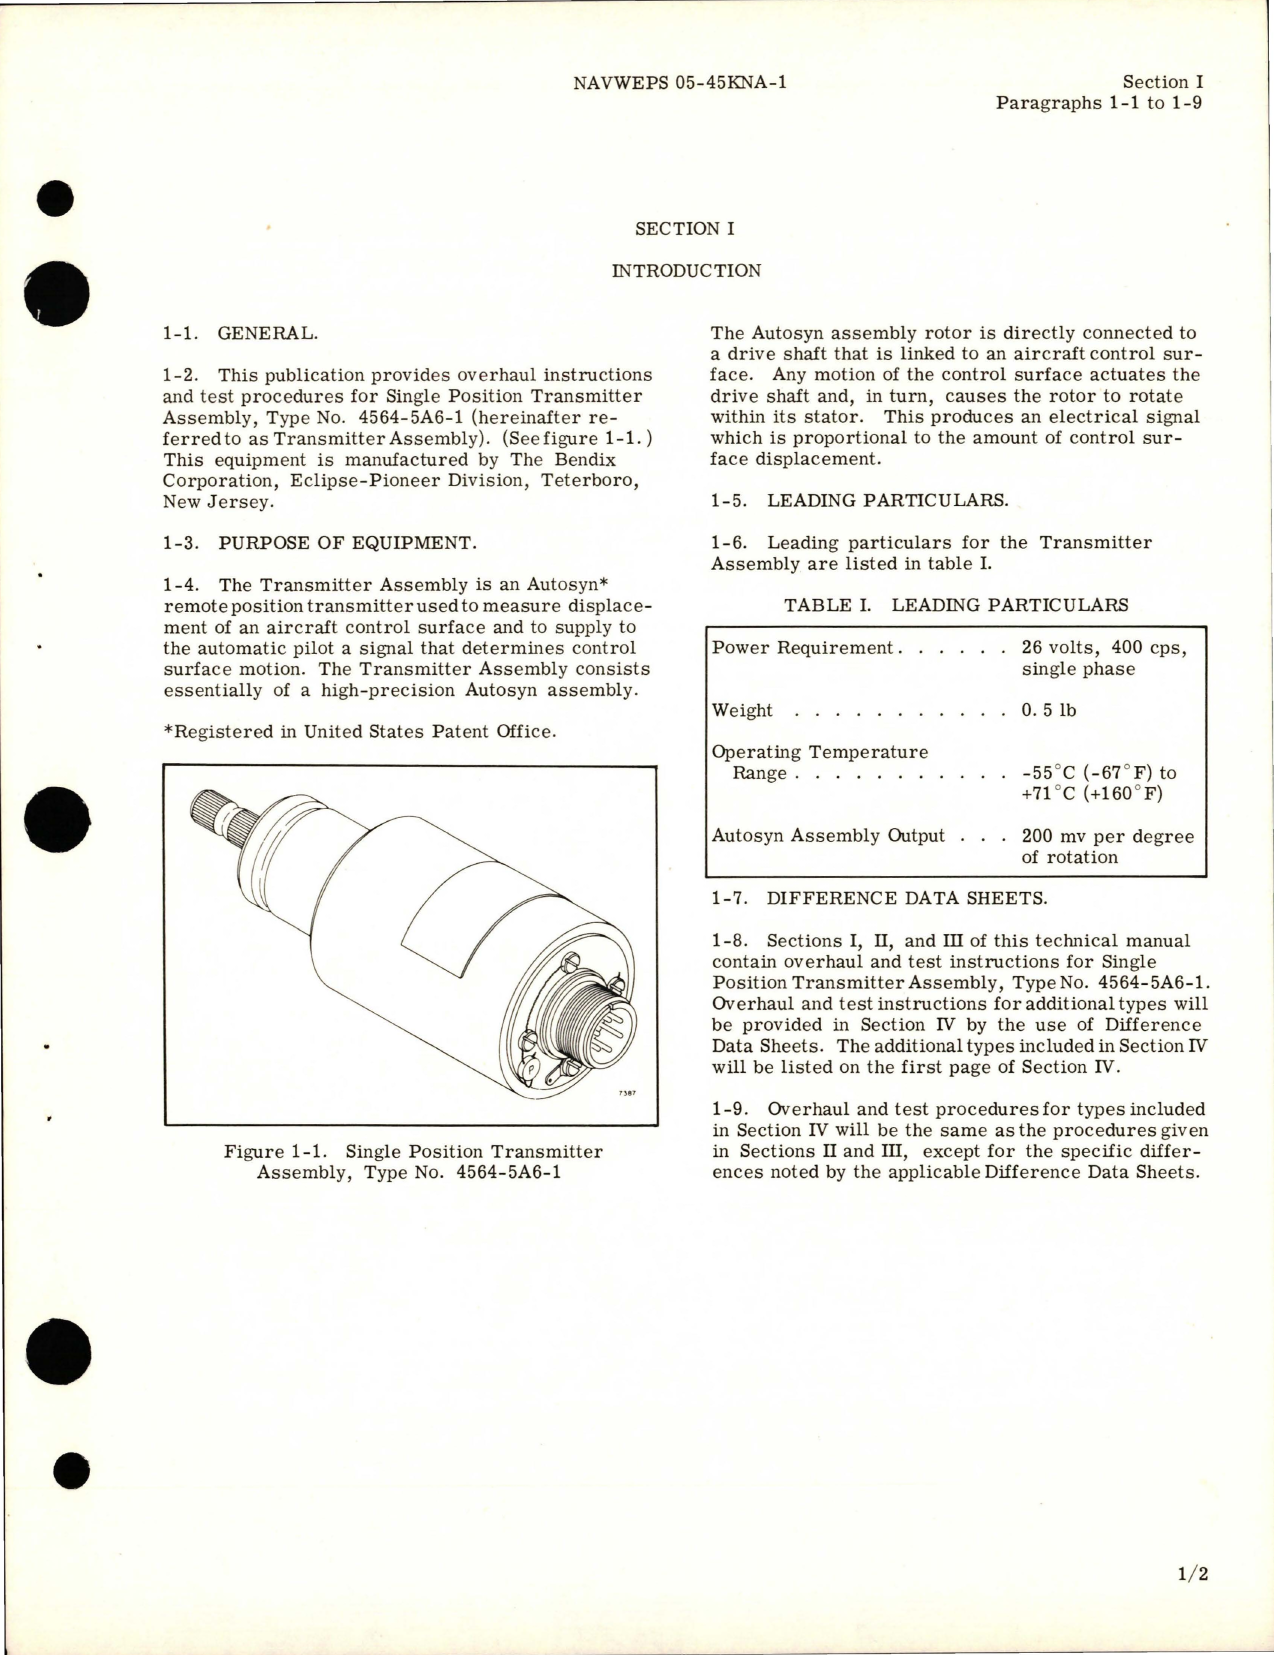 Sample page 5 from AirCorps Library document: Overhaul Instructions for Single Position Transmitter Assembly - Type 4564-5A6-1